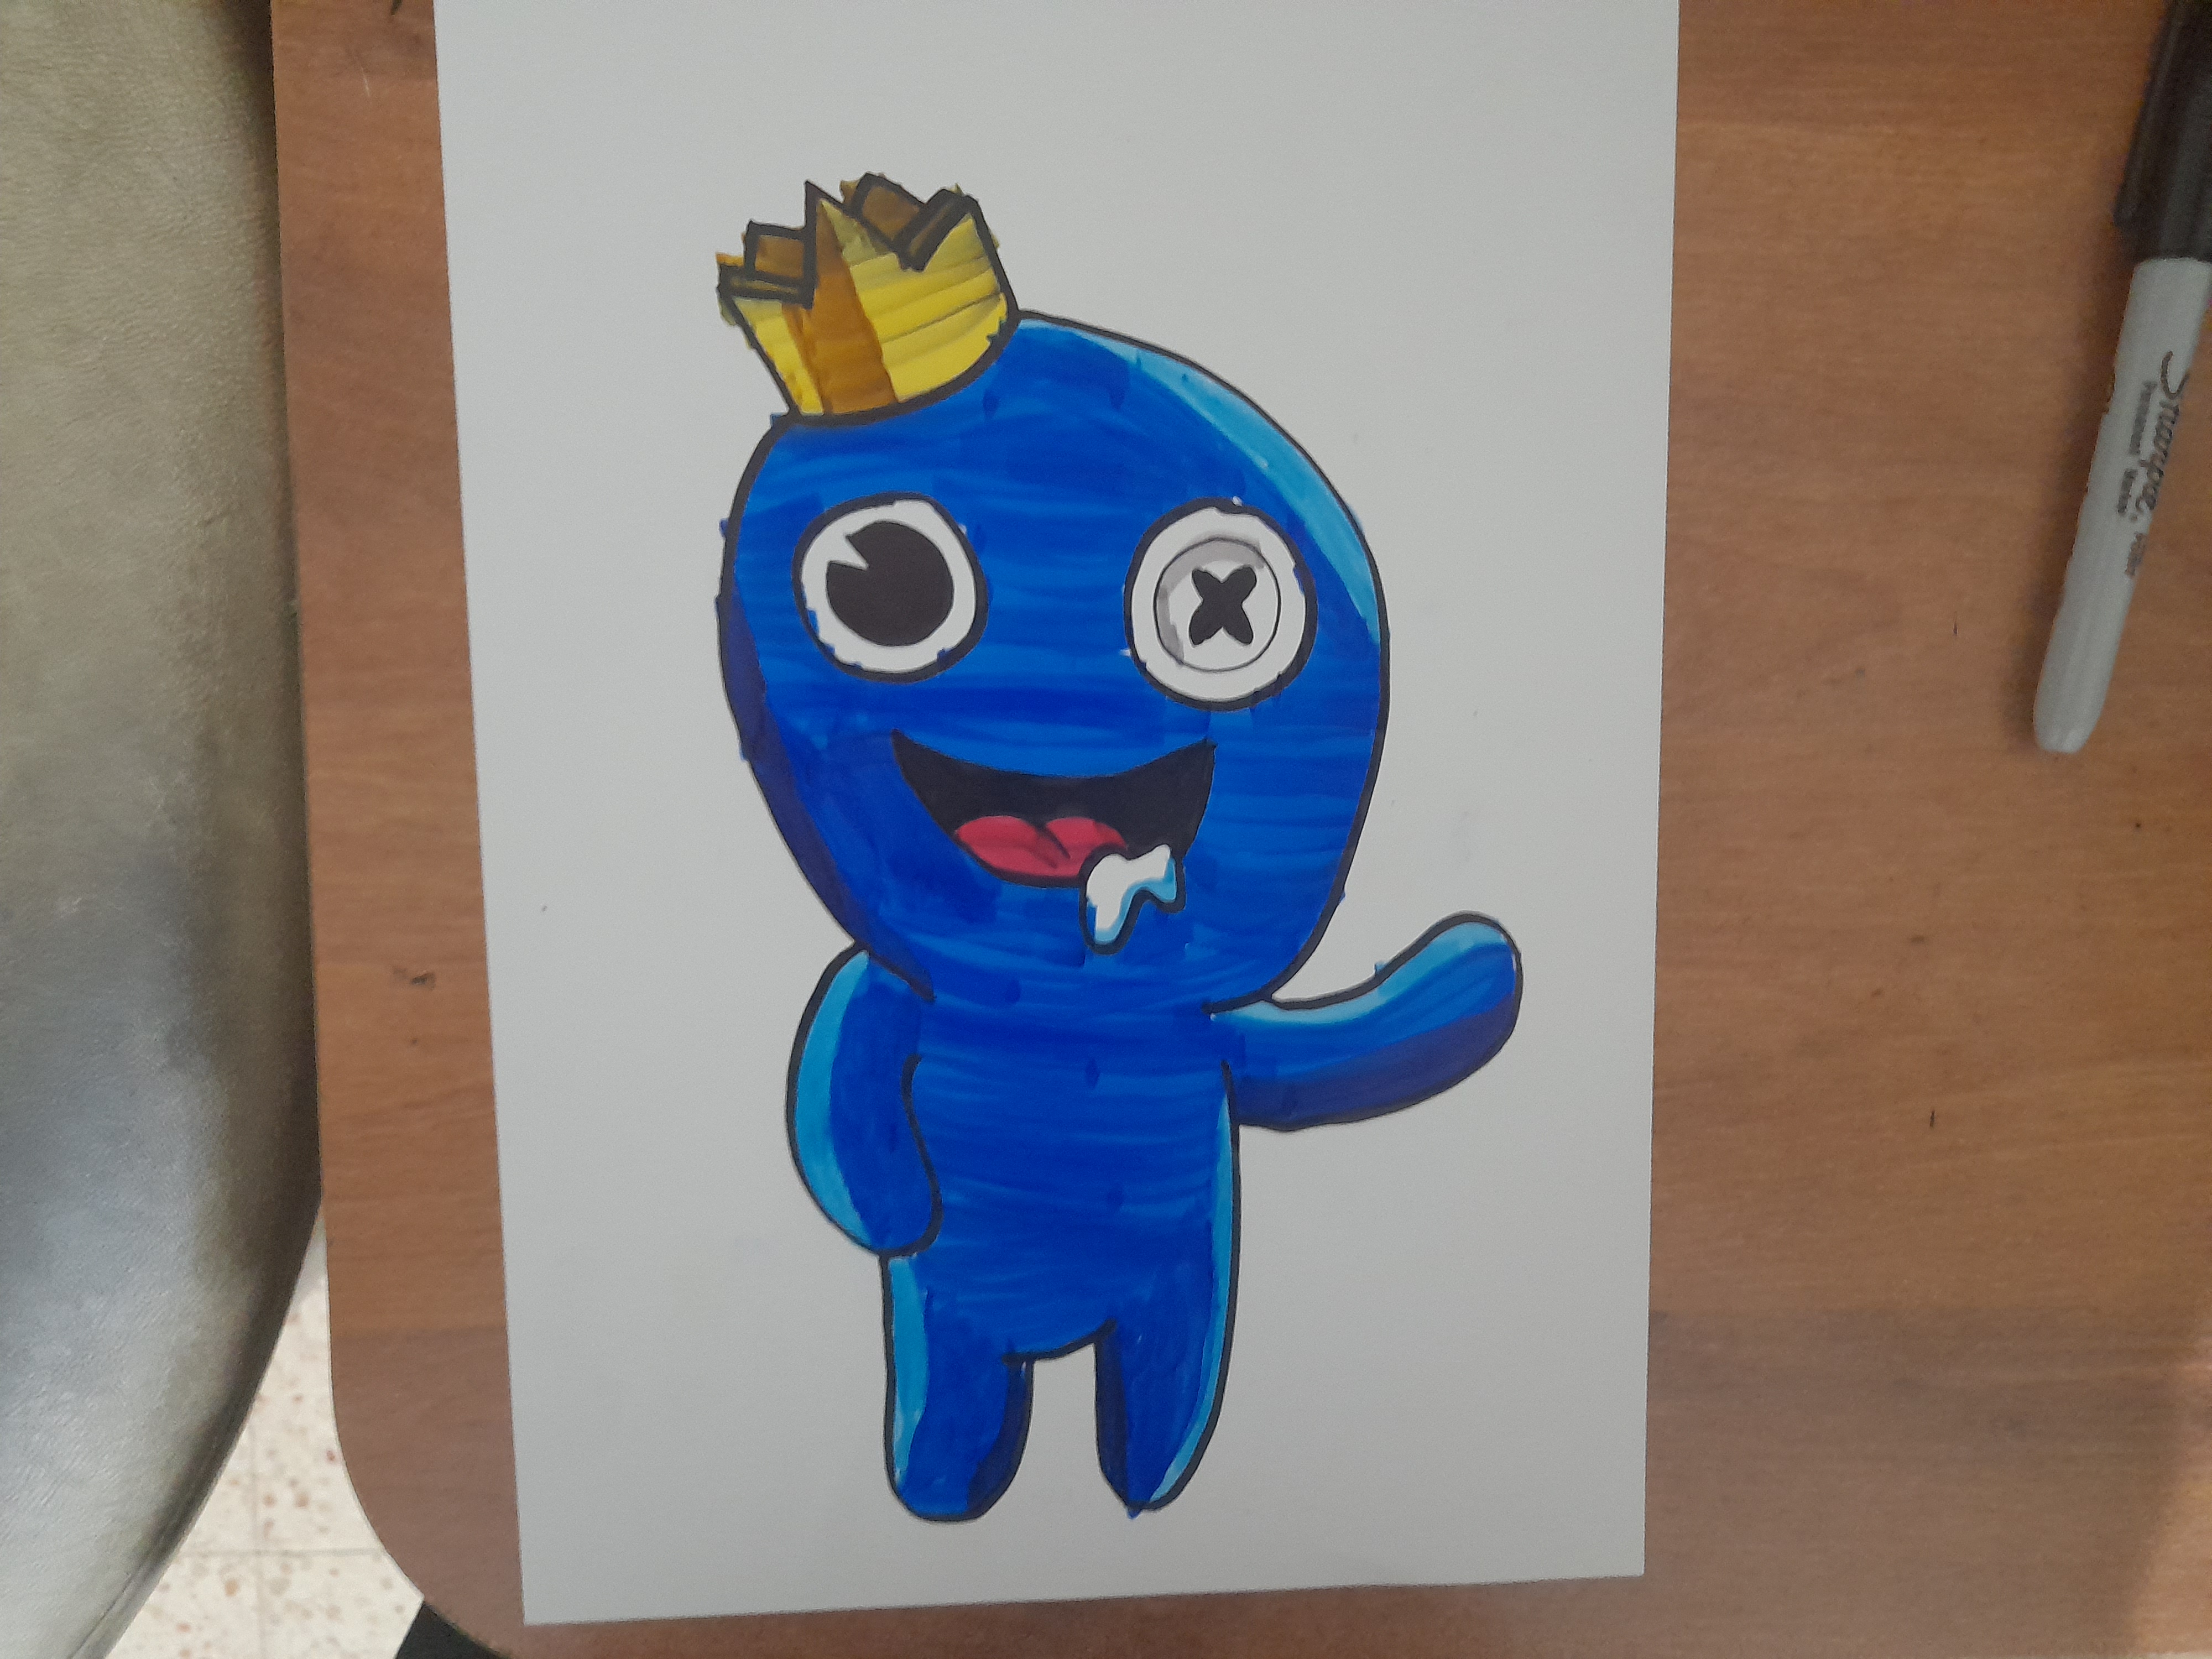 How to Draw Blue from Rainbow Friends 